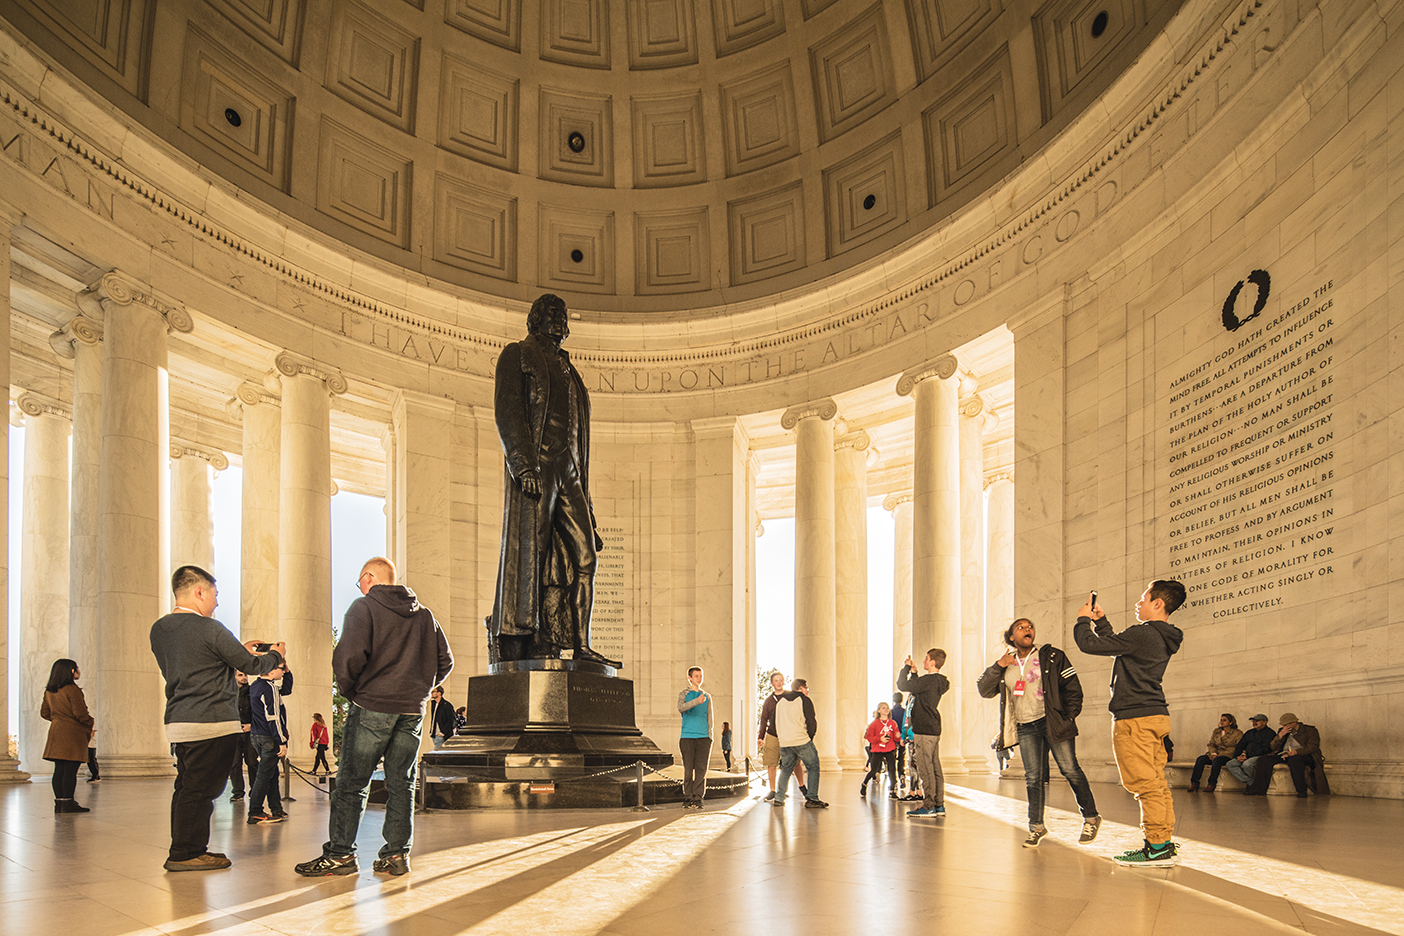 Visitors take pictures of the Jefferson Memorial.